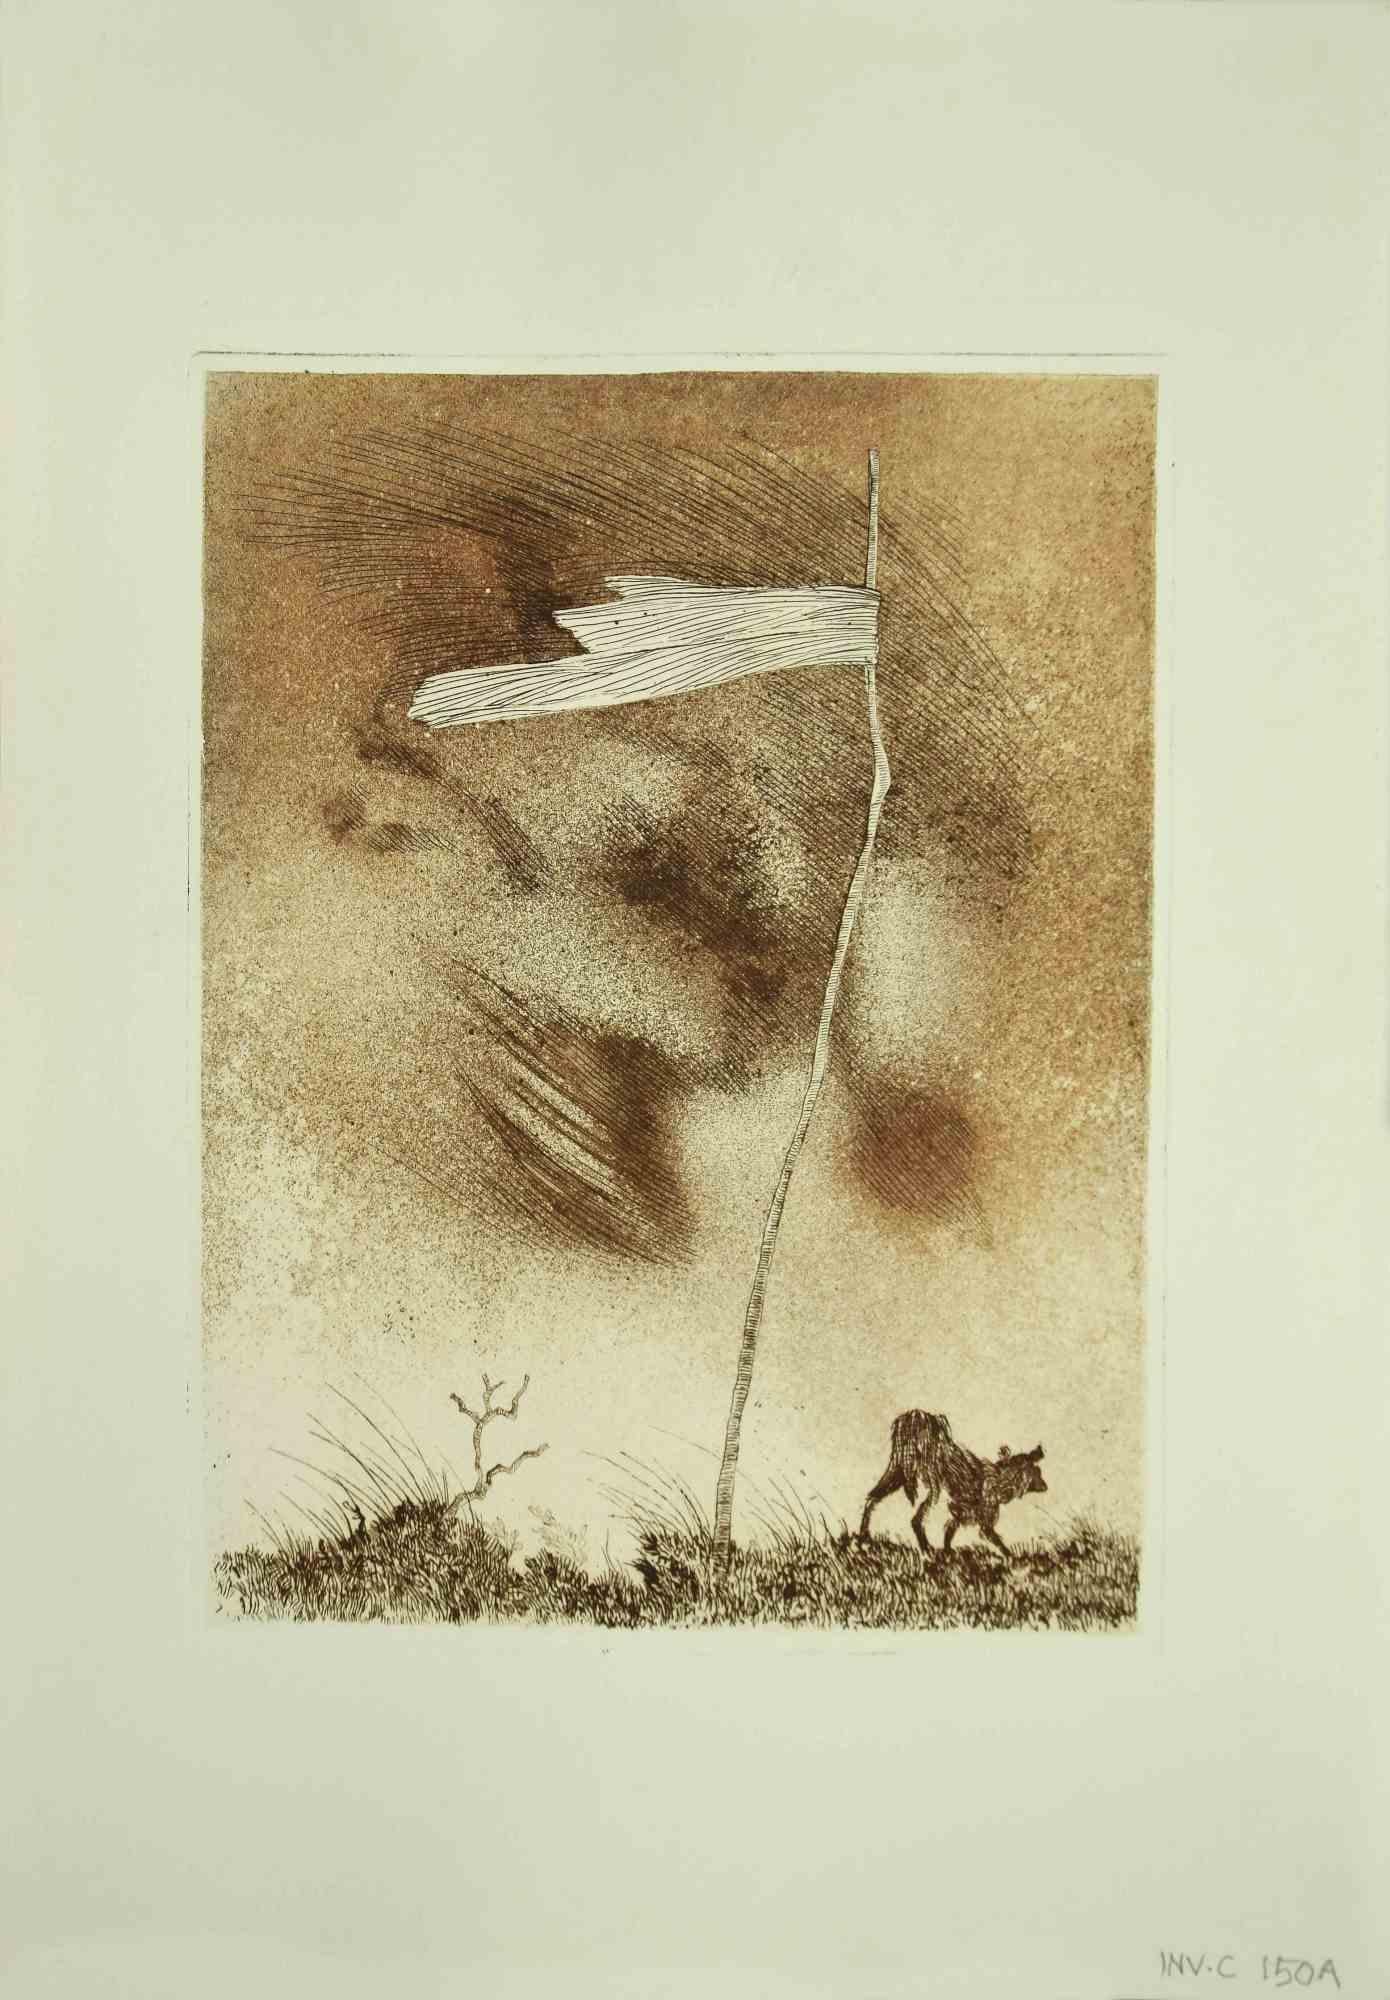 The Flag is an original etching realized by Leo Guida in the 1970s.

Good condition.

The artwork is depicted through strong strokes with perfect hatchings.

Not signed and not dated.